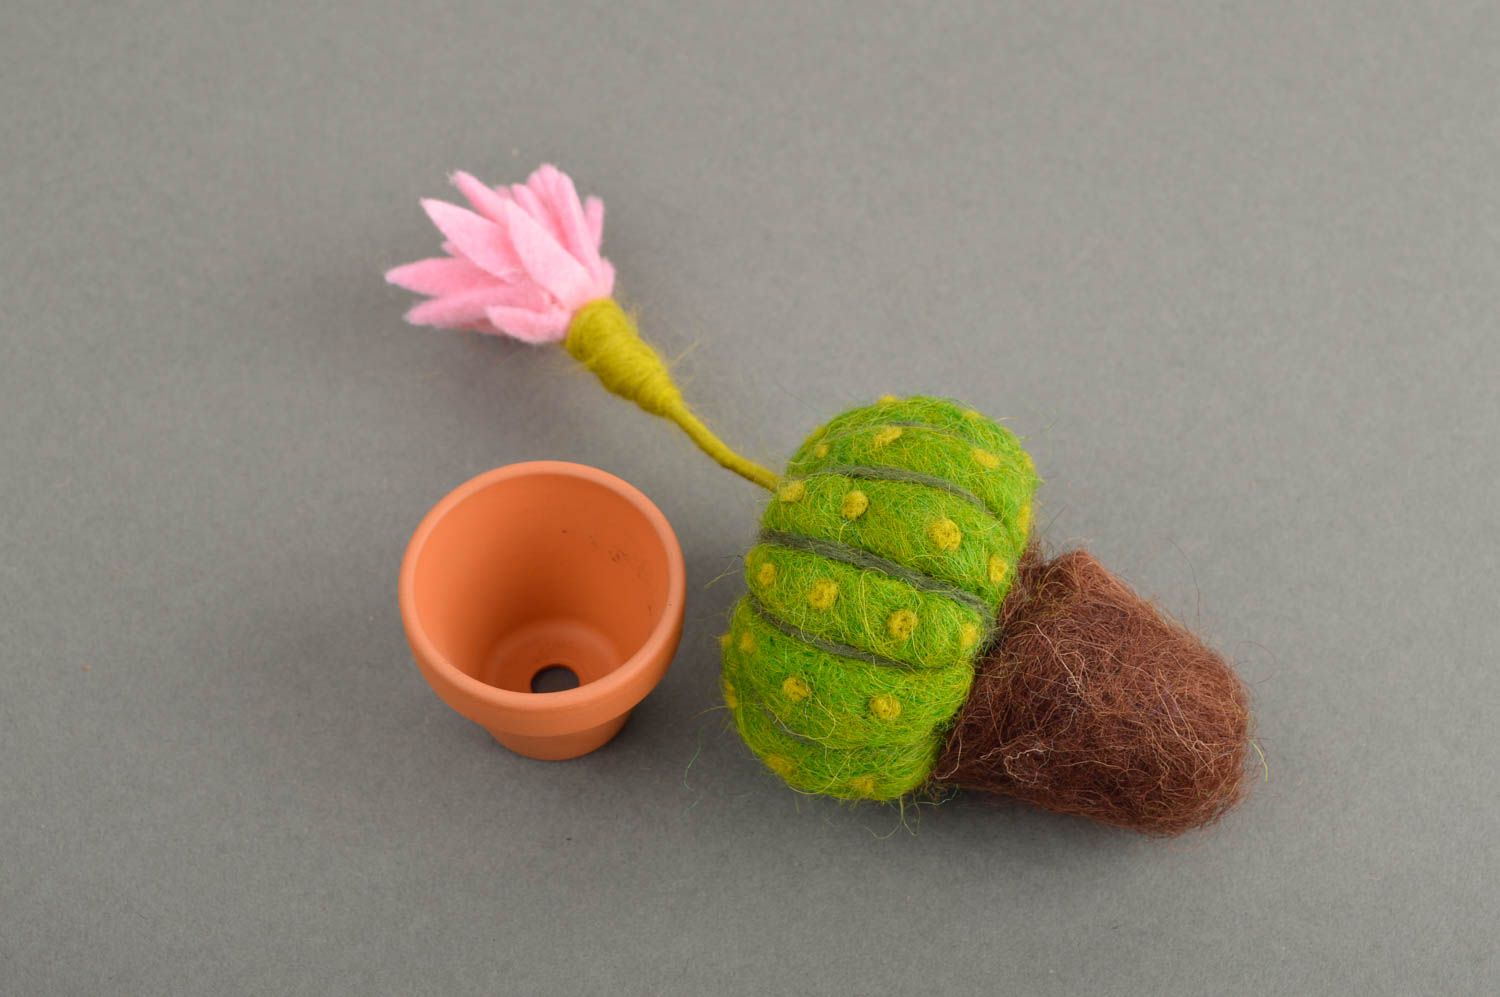 Unusual handmade wool flowers table decor ideas small gifts decorative use only photo 5